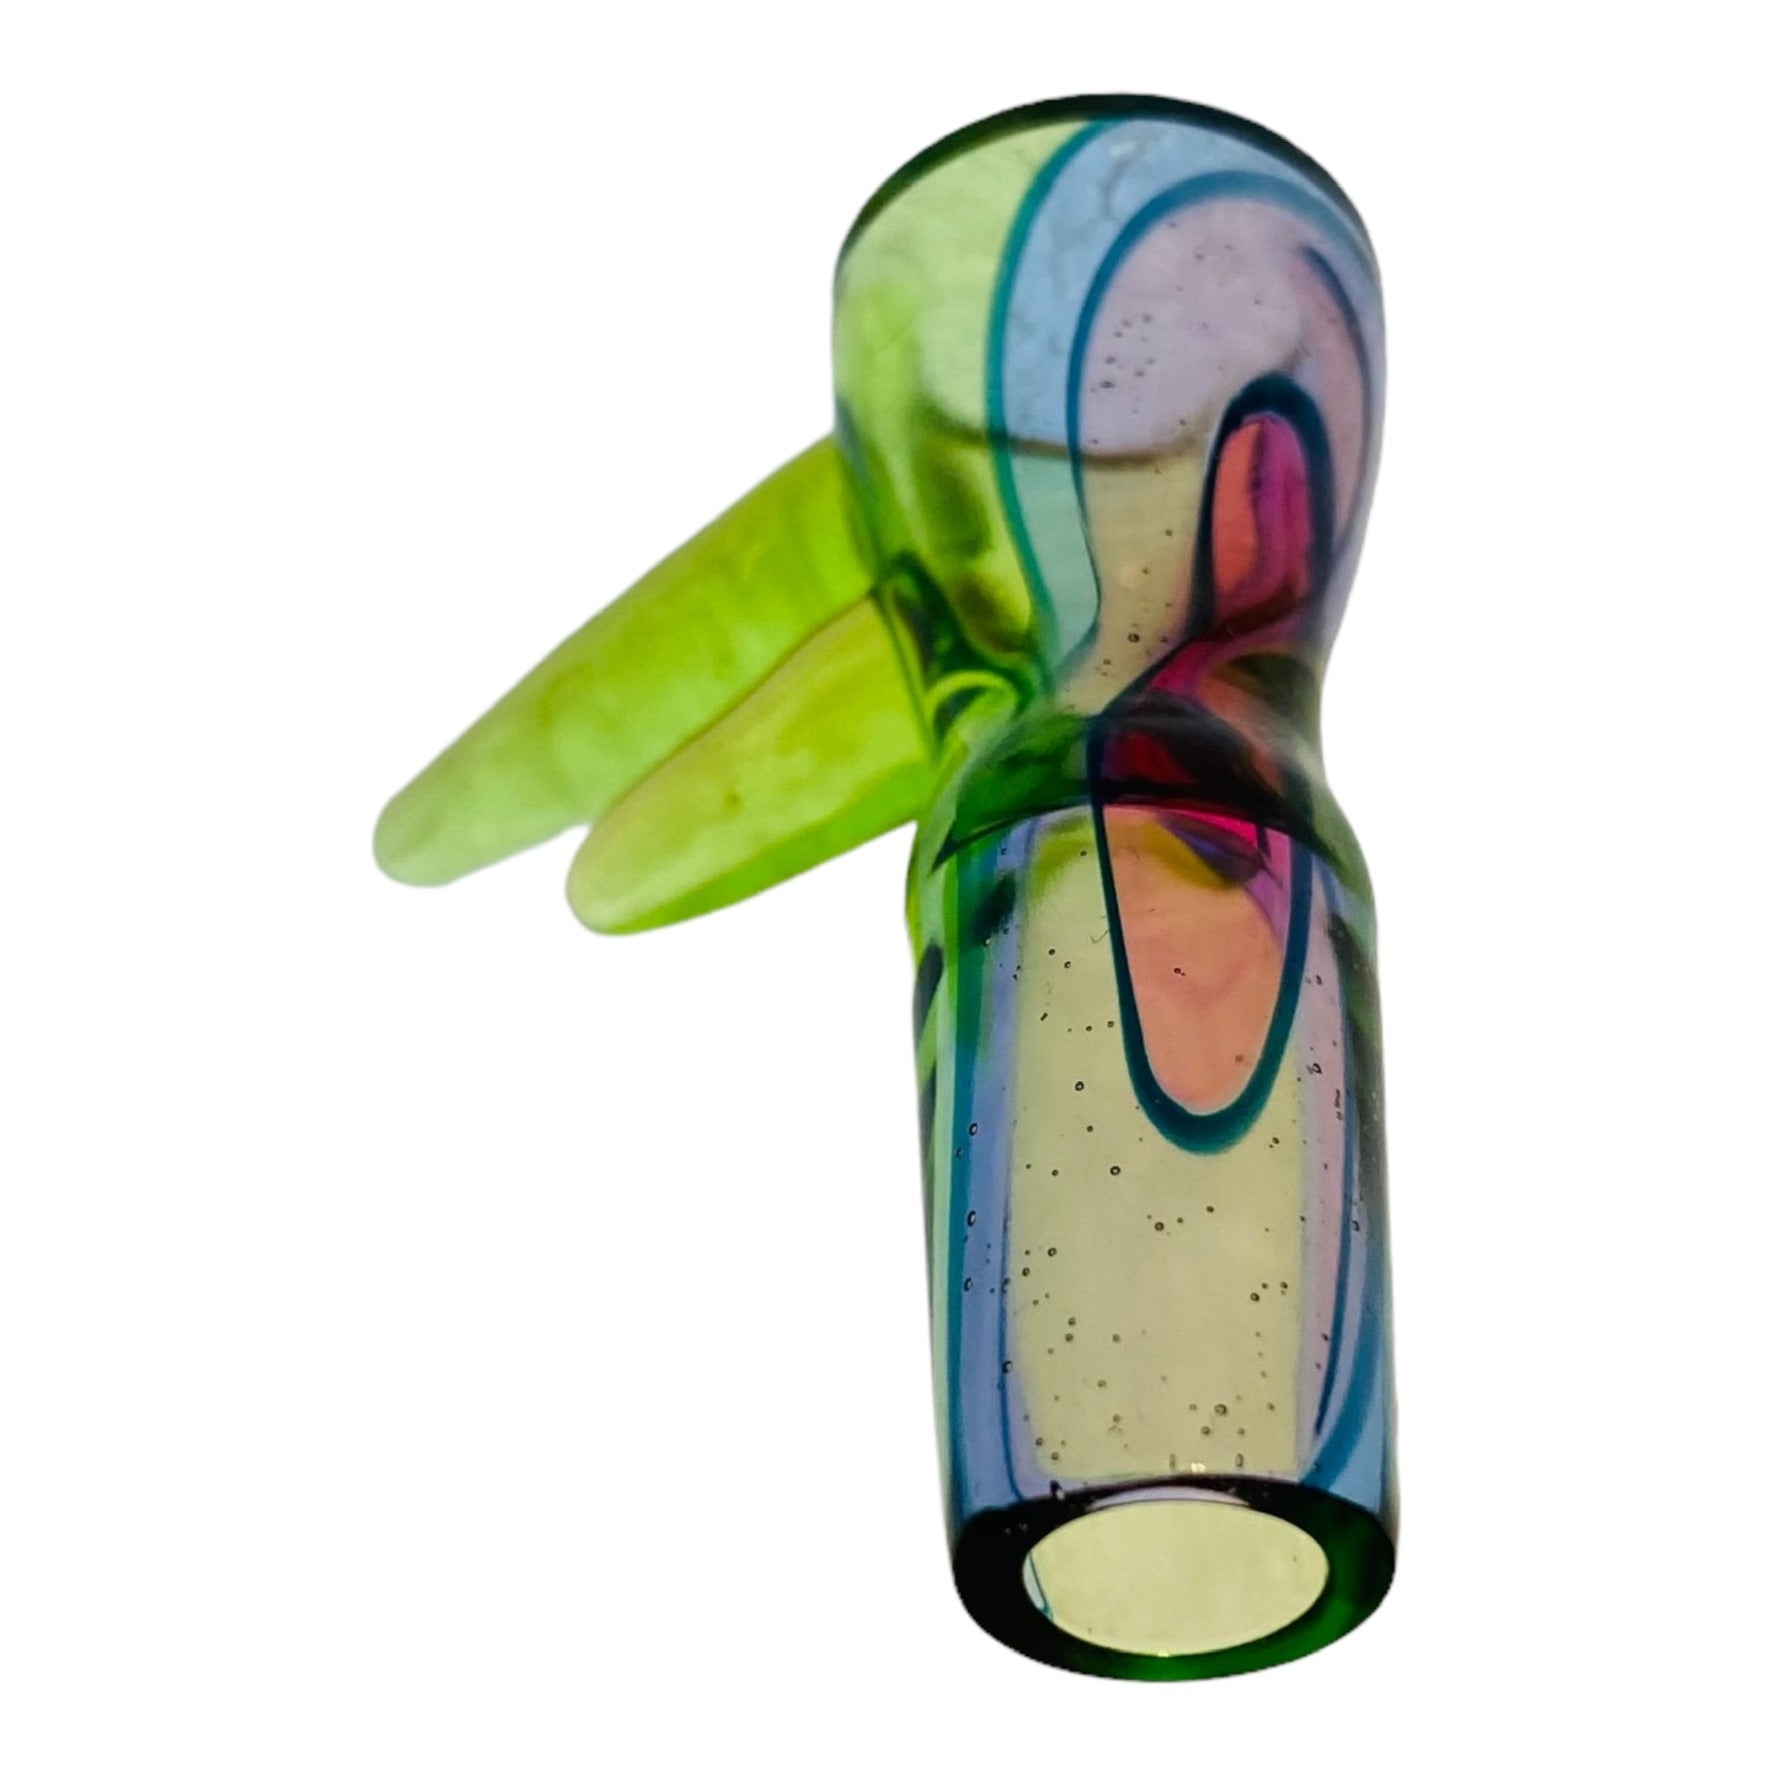 Optera Glass - Multicolored Stained Glass With Green Handle - 14mm Bowl Piece 